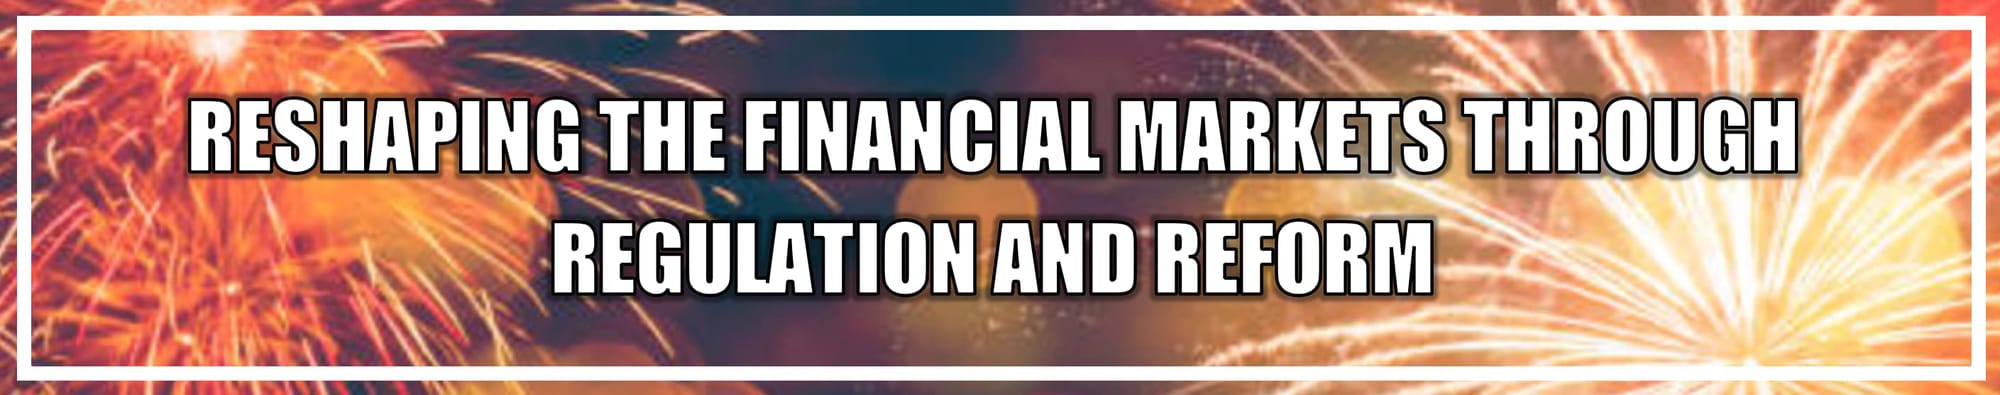 HEADER - RESHAPING THE FINANCIAL MARKETS THROUGH REGULATION AND REFORM